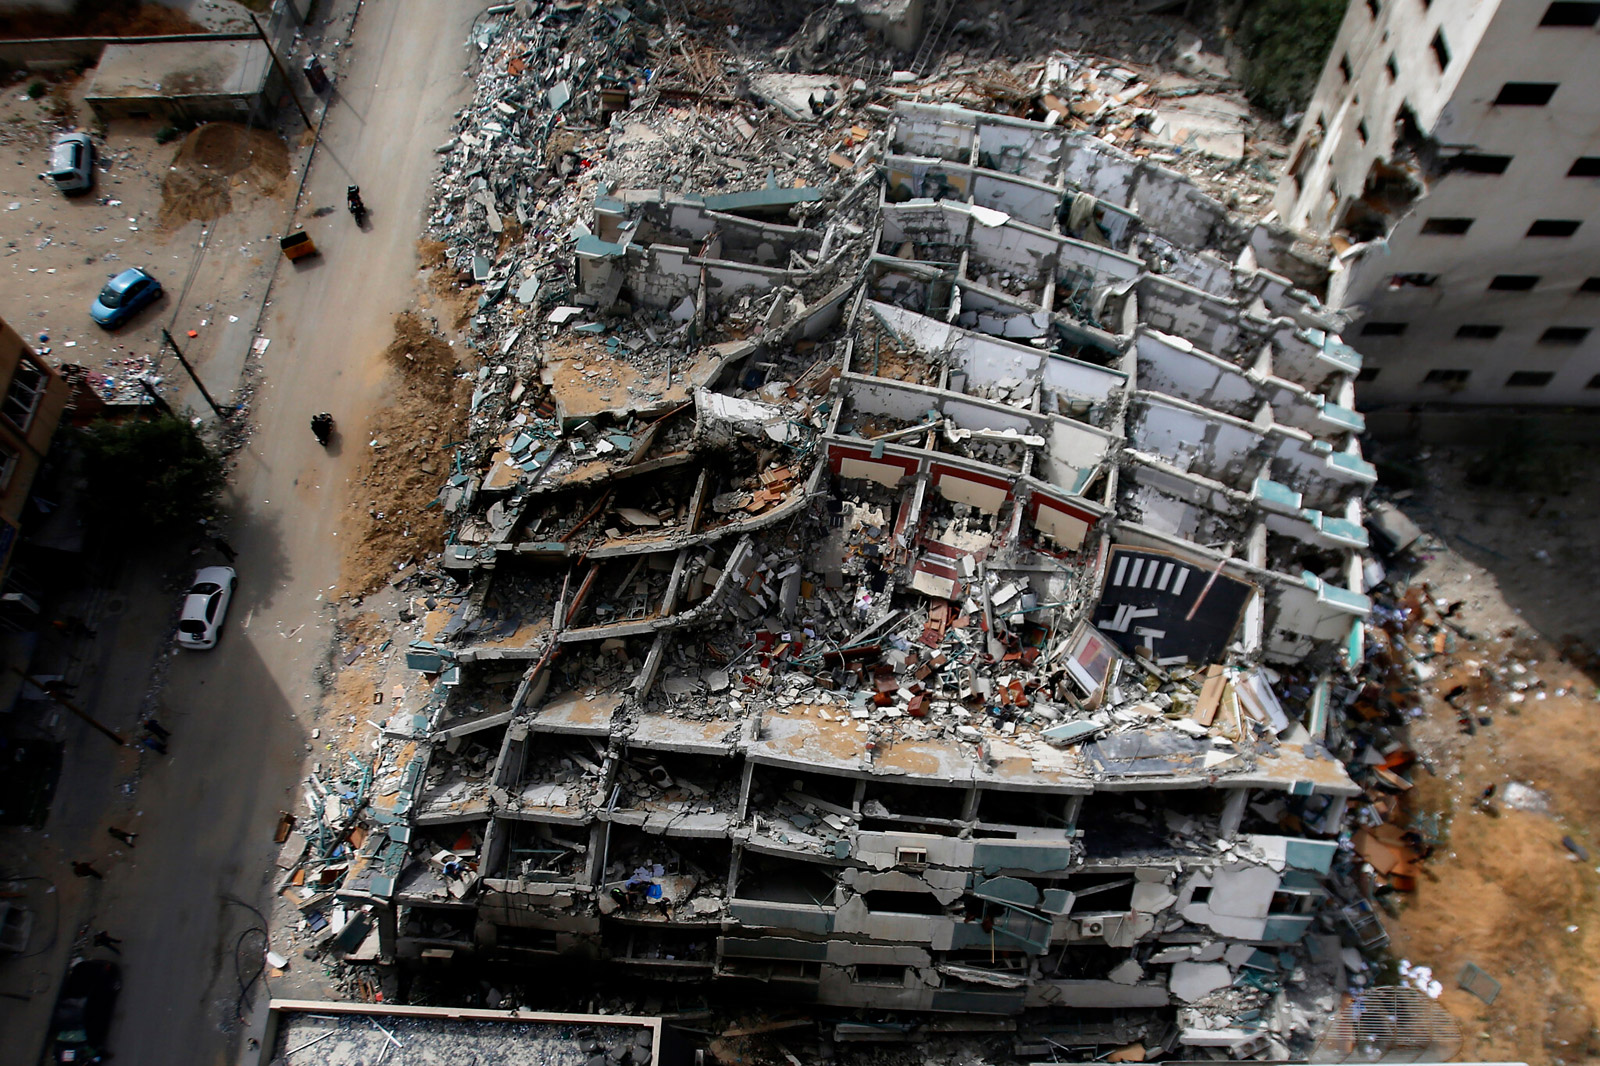 The rubble of the Jalaa Tower—the building in Gaza that housed some sixty residential apartments and the offices of AP, Al Jazeera, and a number of other media organizations—after it was bombed by Israel on 15 May 2021. According to the Israeli newspaper Haaretz, at the meeting convened to consider the legality of the strike, “Major General Sharon Afek, the military advocate general at the time, ruled that it did not violate international law. A few senior defense officials warned, however, of the PR damage the strike would cause.” Photo Hatem Moussa.